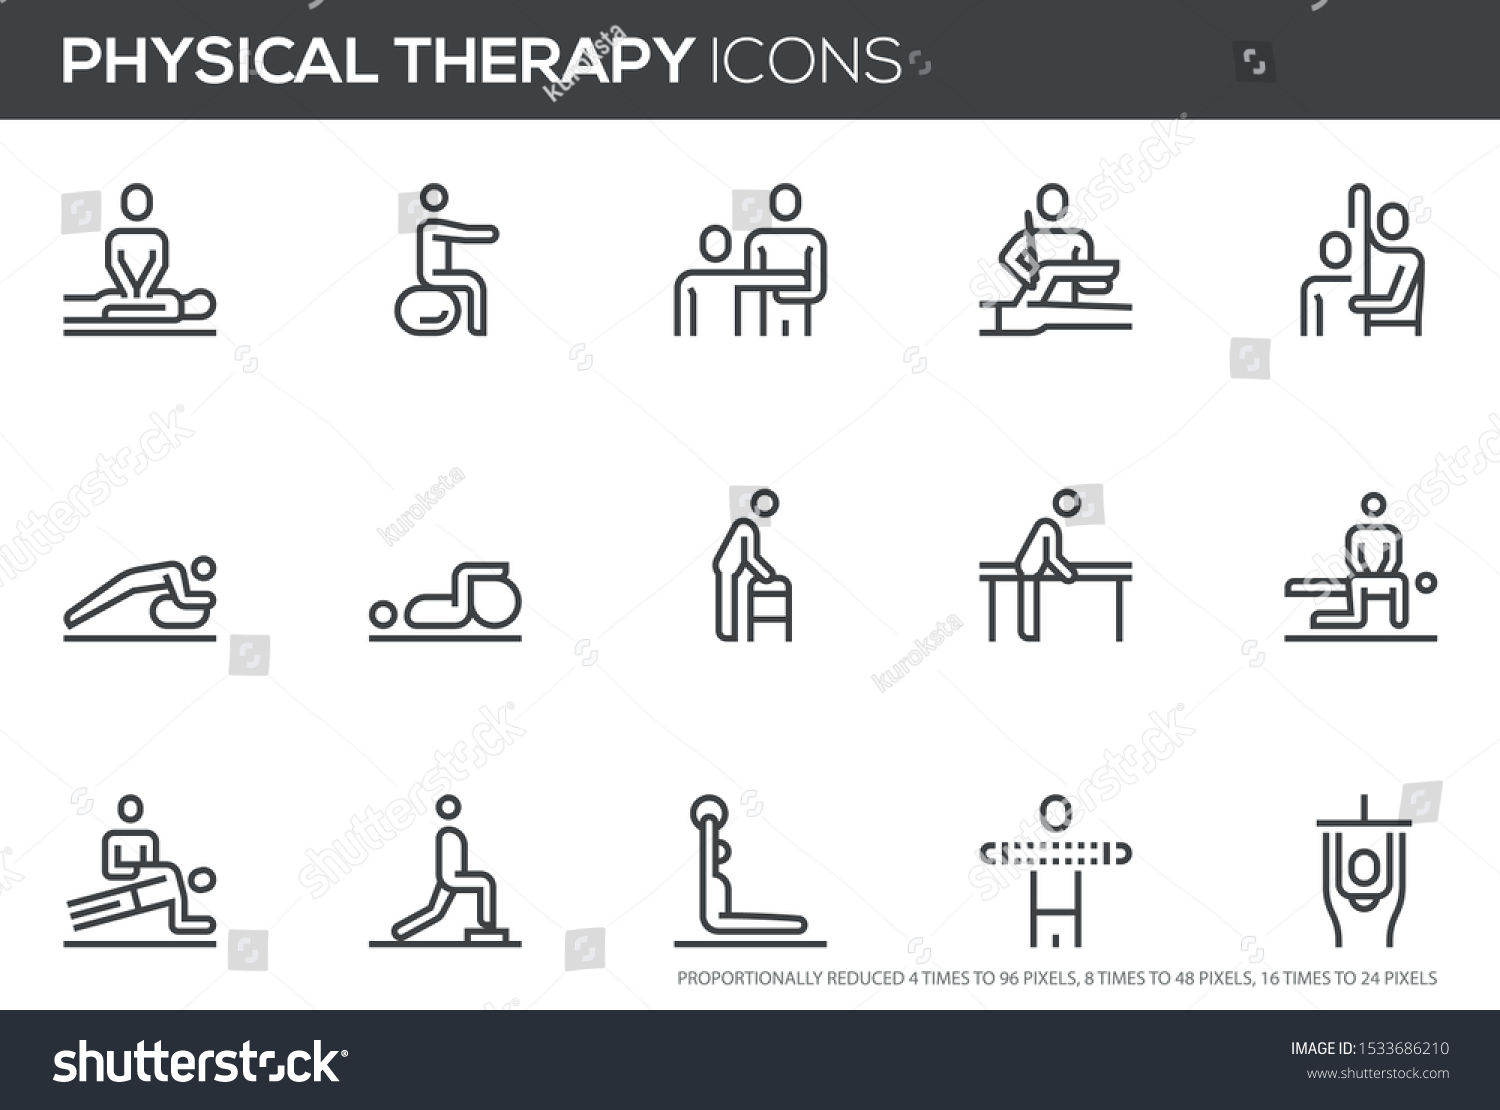 SVG of Physical Therapy Vector Line Icons Set. Rehabilitation Treatment, Therapeutic, Physiotherapy, Recuperation. Perfect pixel icons, such can be scaled to 24, 48, 96 pixels. svg